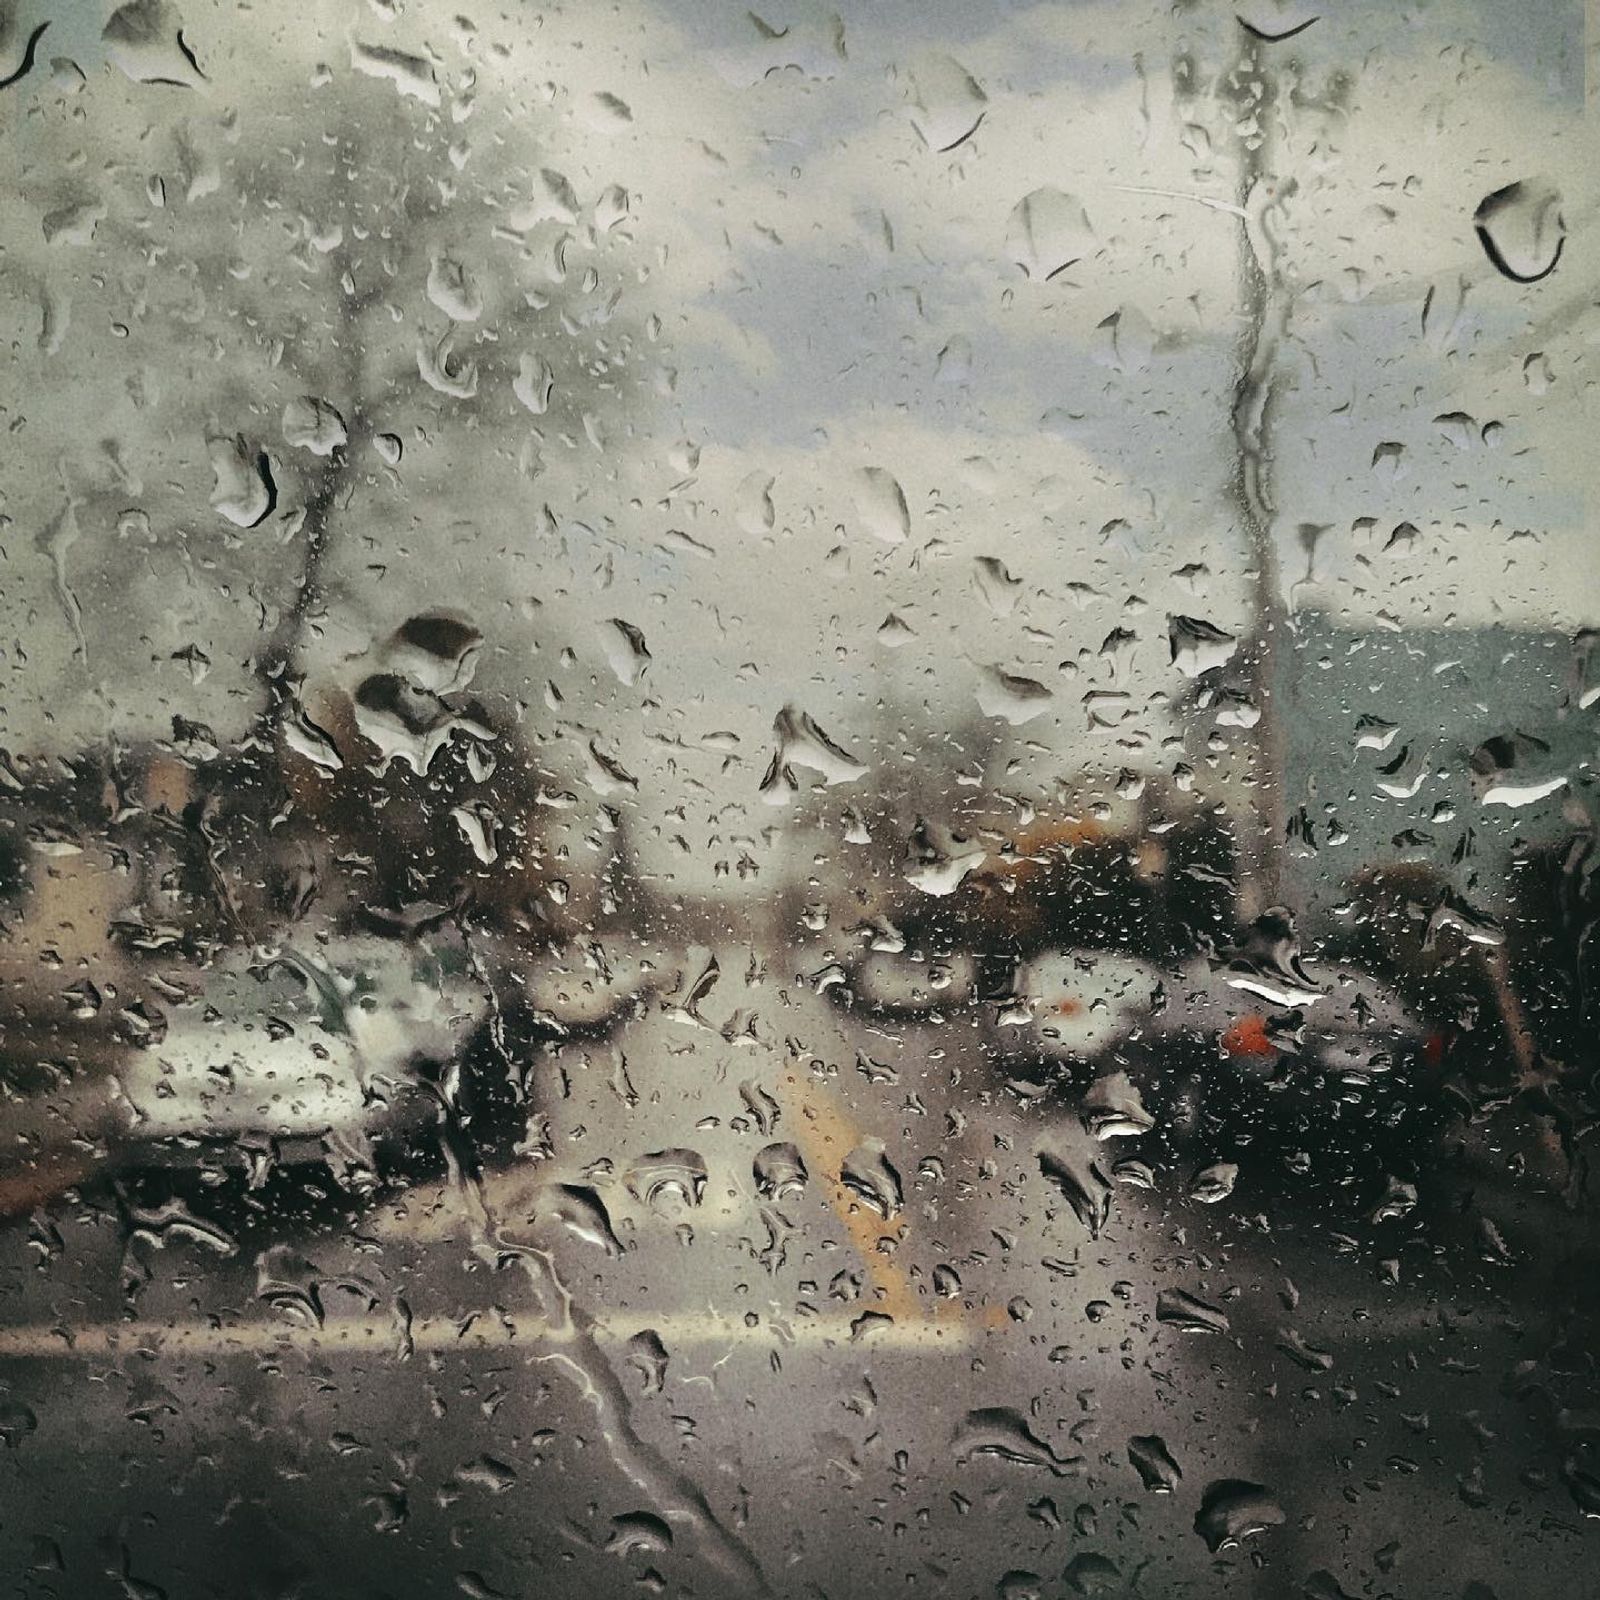 © Tirdad Aghakhani - Image from the Rain photography project